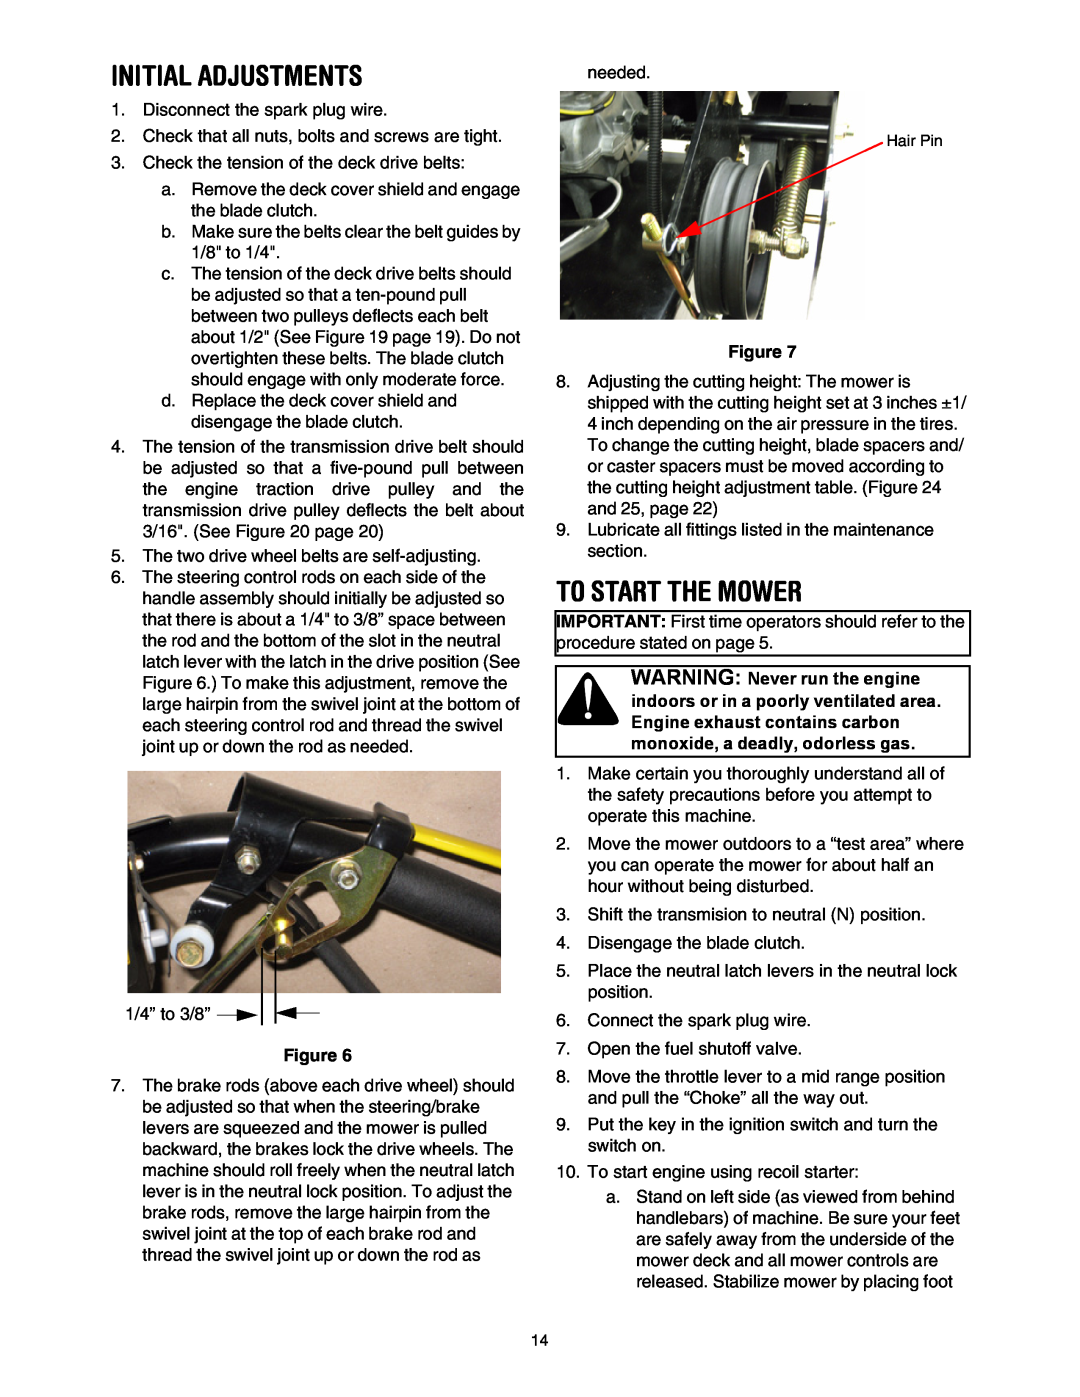 Cub Cadet G 1236 service manual Initial Adjustments, To Start The Mower 